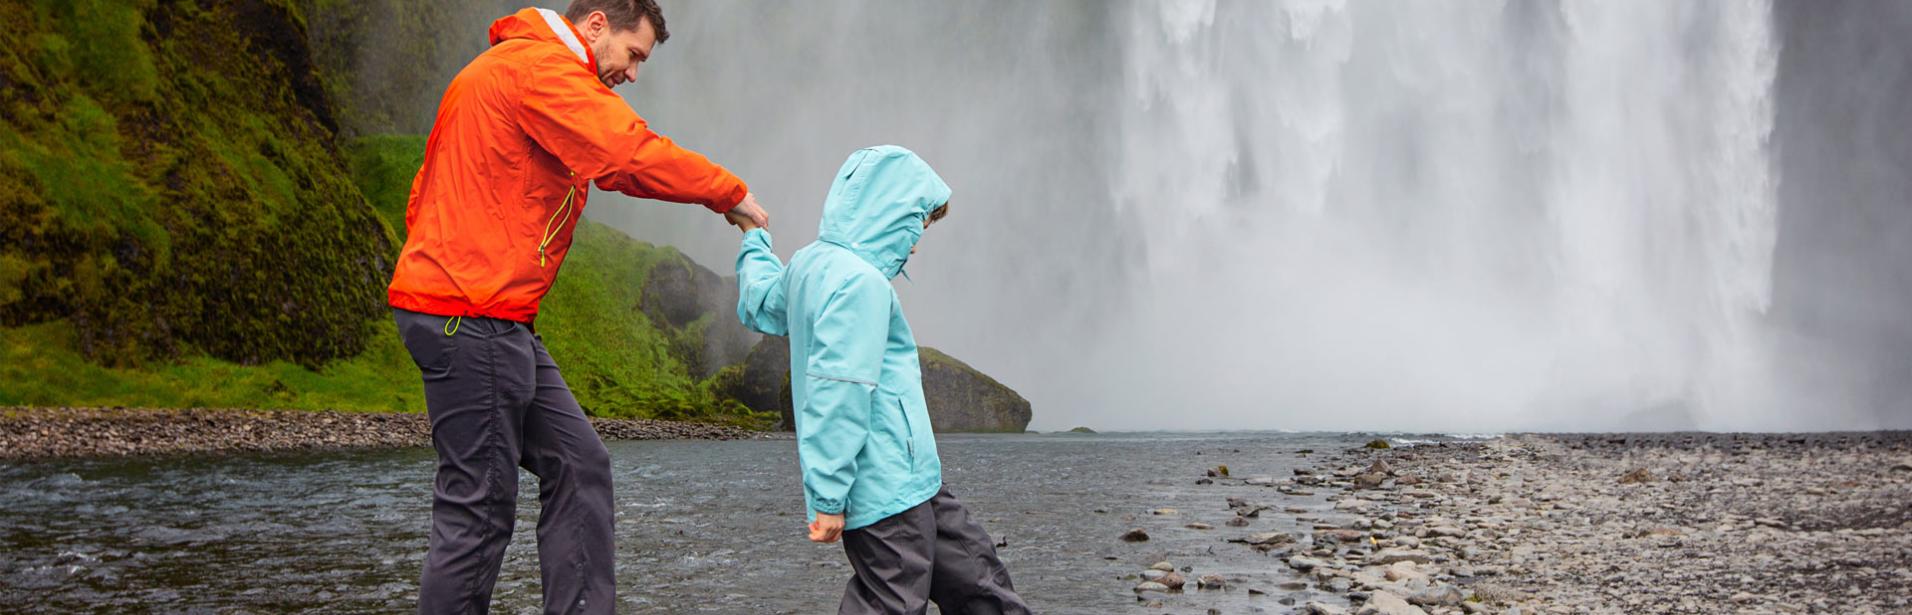 Father and son by waterfall Skogafoss in Iceland.